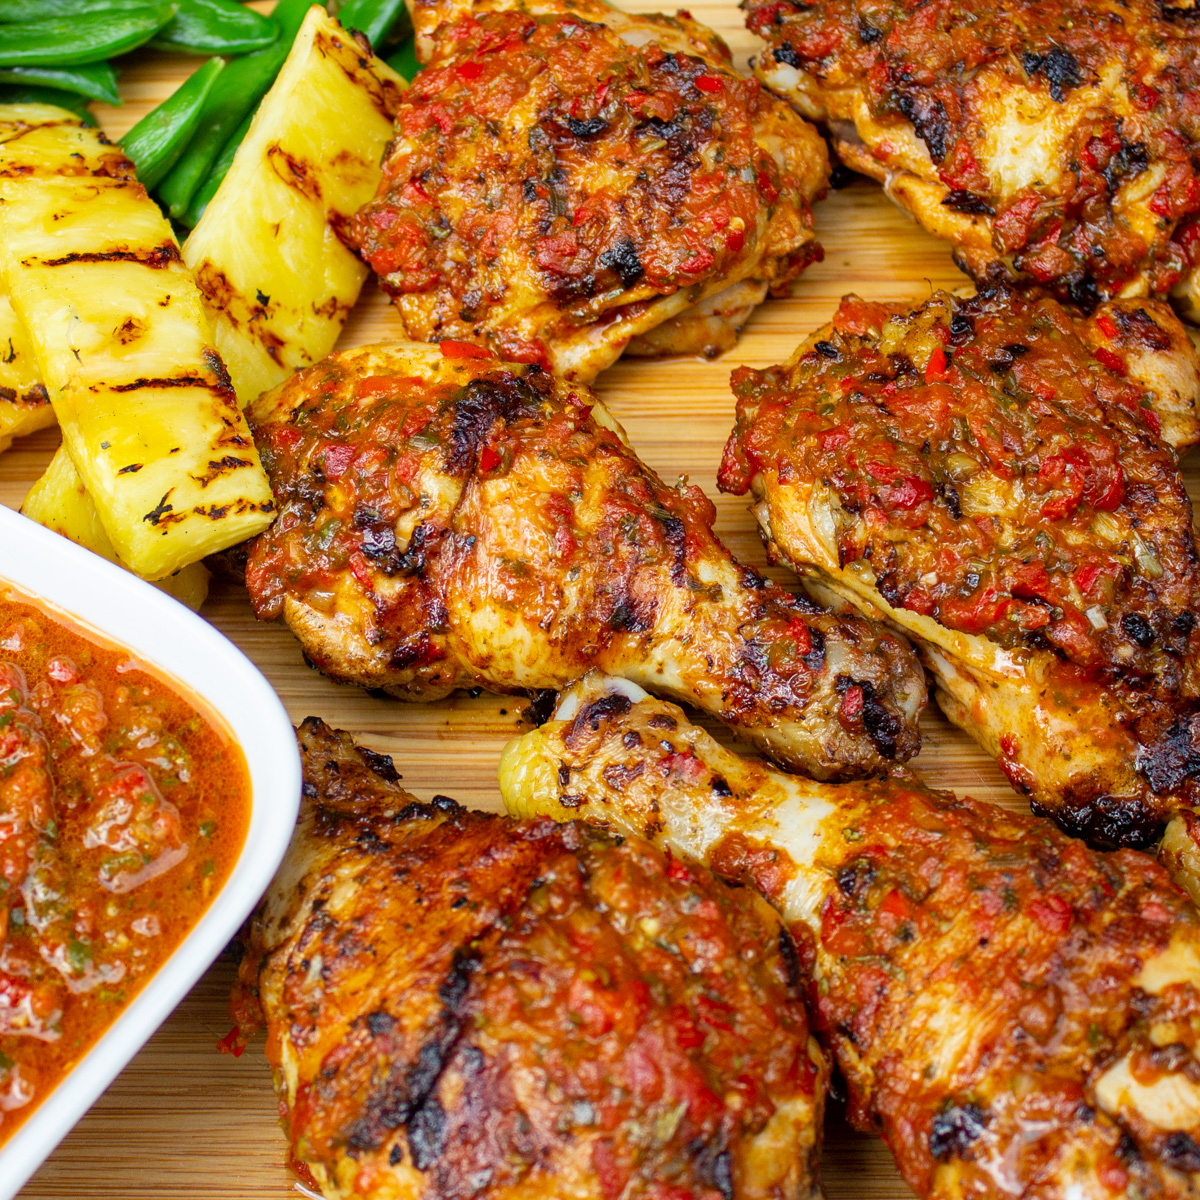 finished peri peri chicken on cutting board with pineapple spears, peas and extra peri peri sauce.